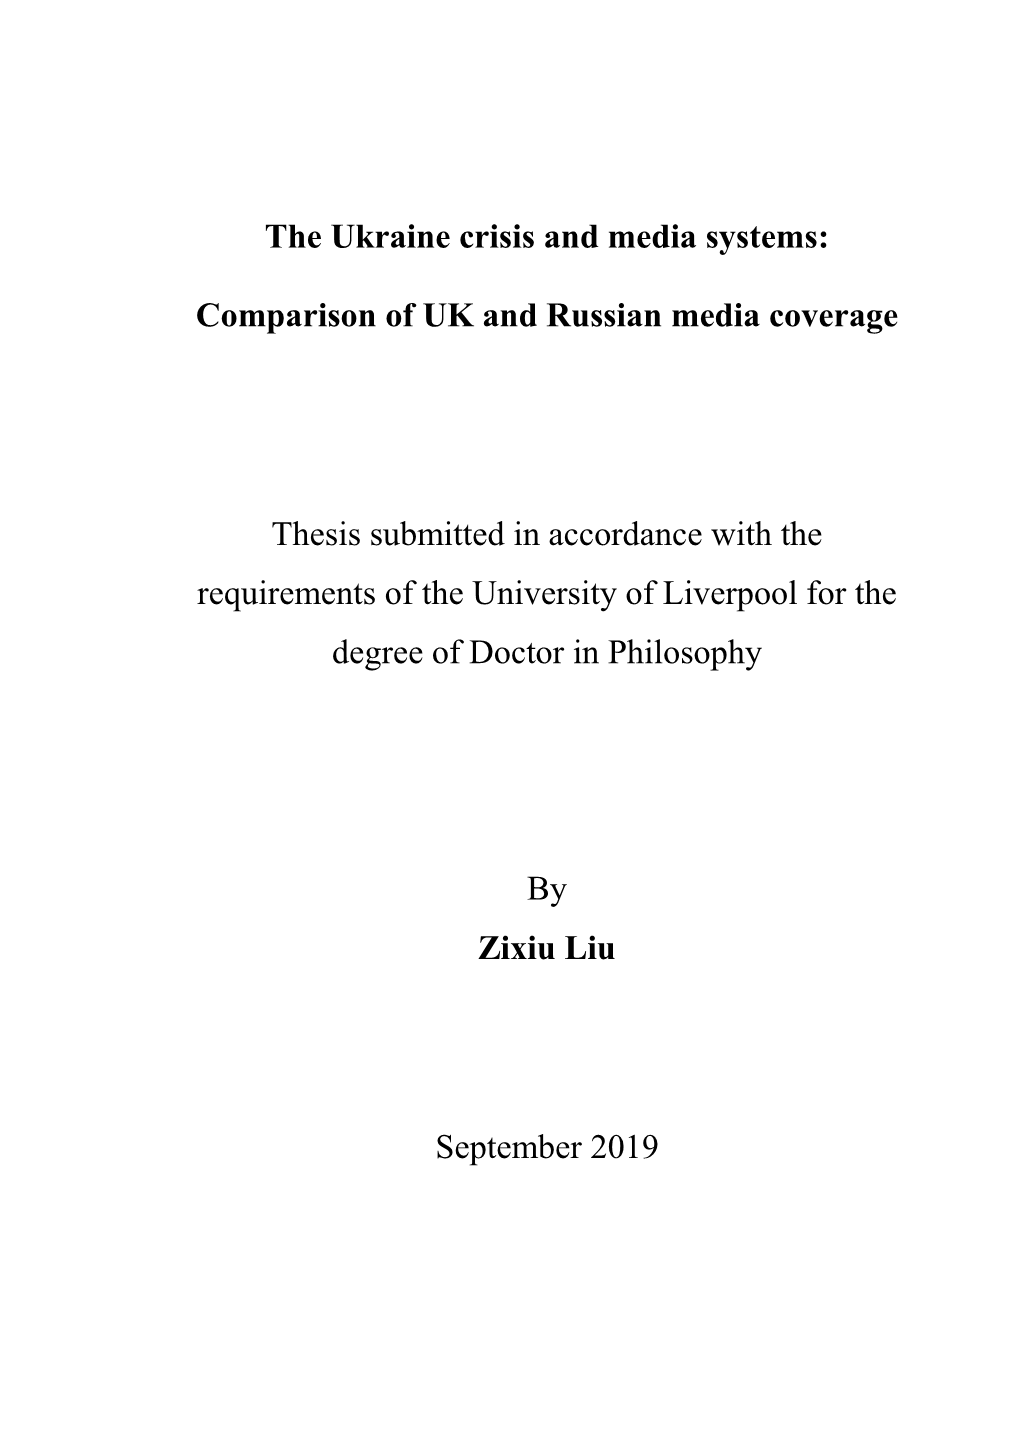 The Ukraine Crisis and Media Systems: Comparison of UK and Russian Media Coverage Thesis Submitted in Accordance with the Requir